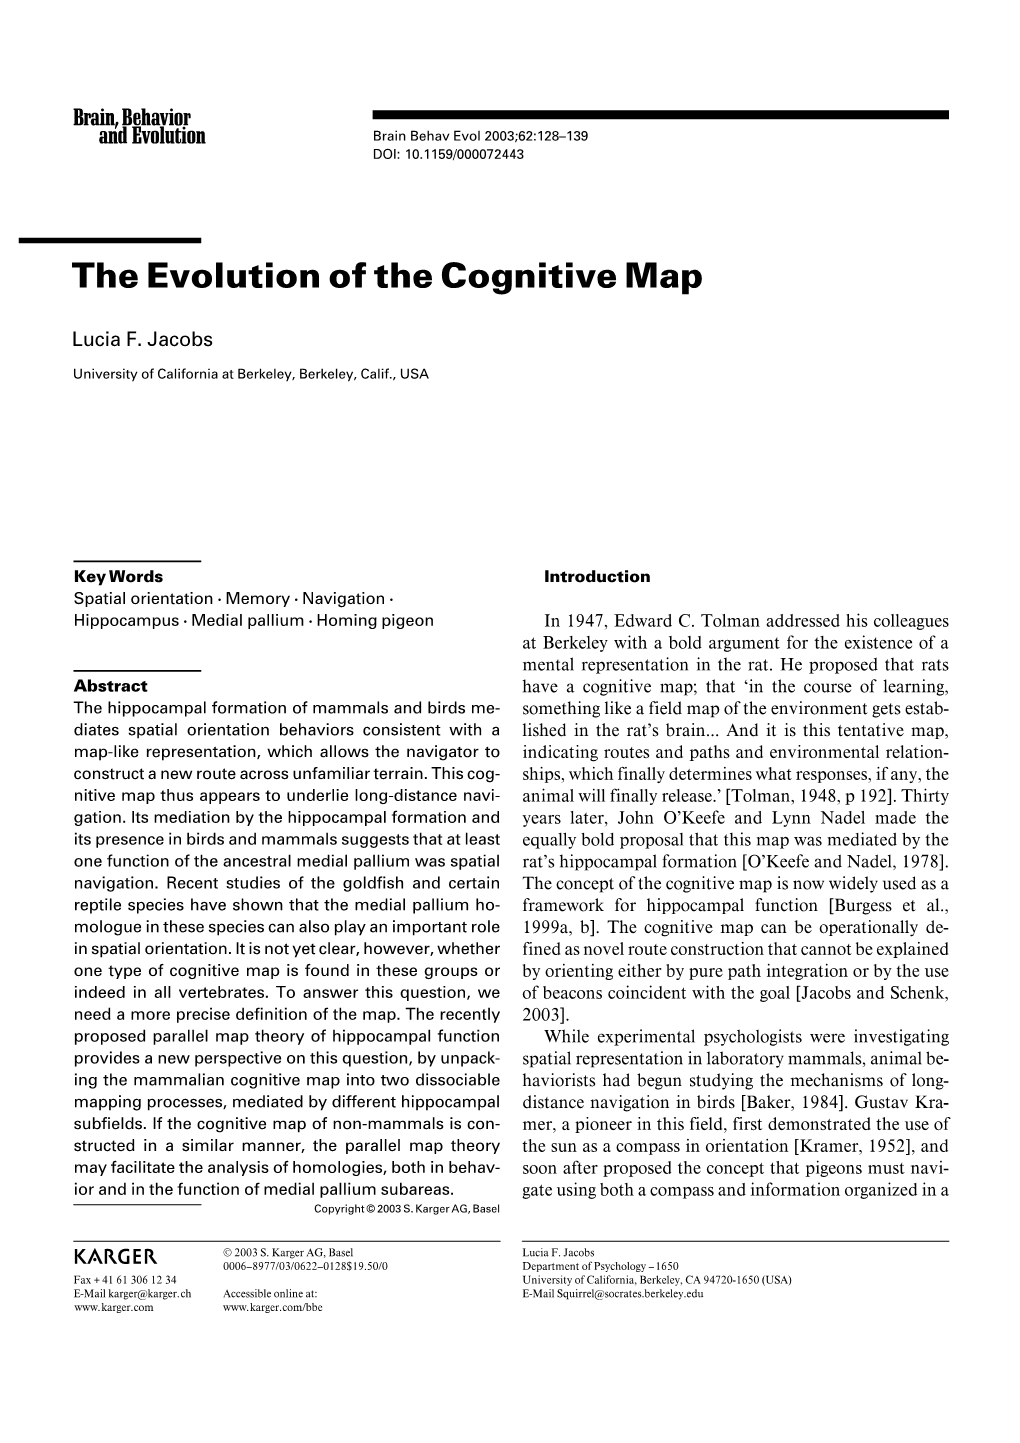 The Evolution of the Cognitive Map